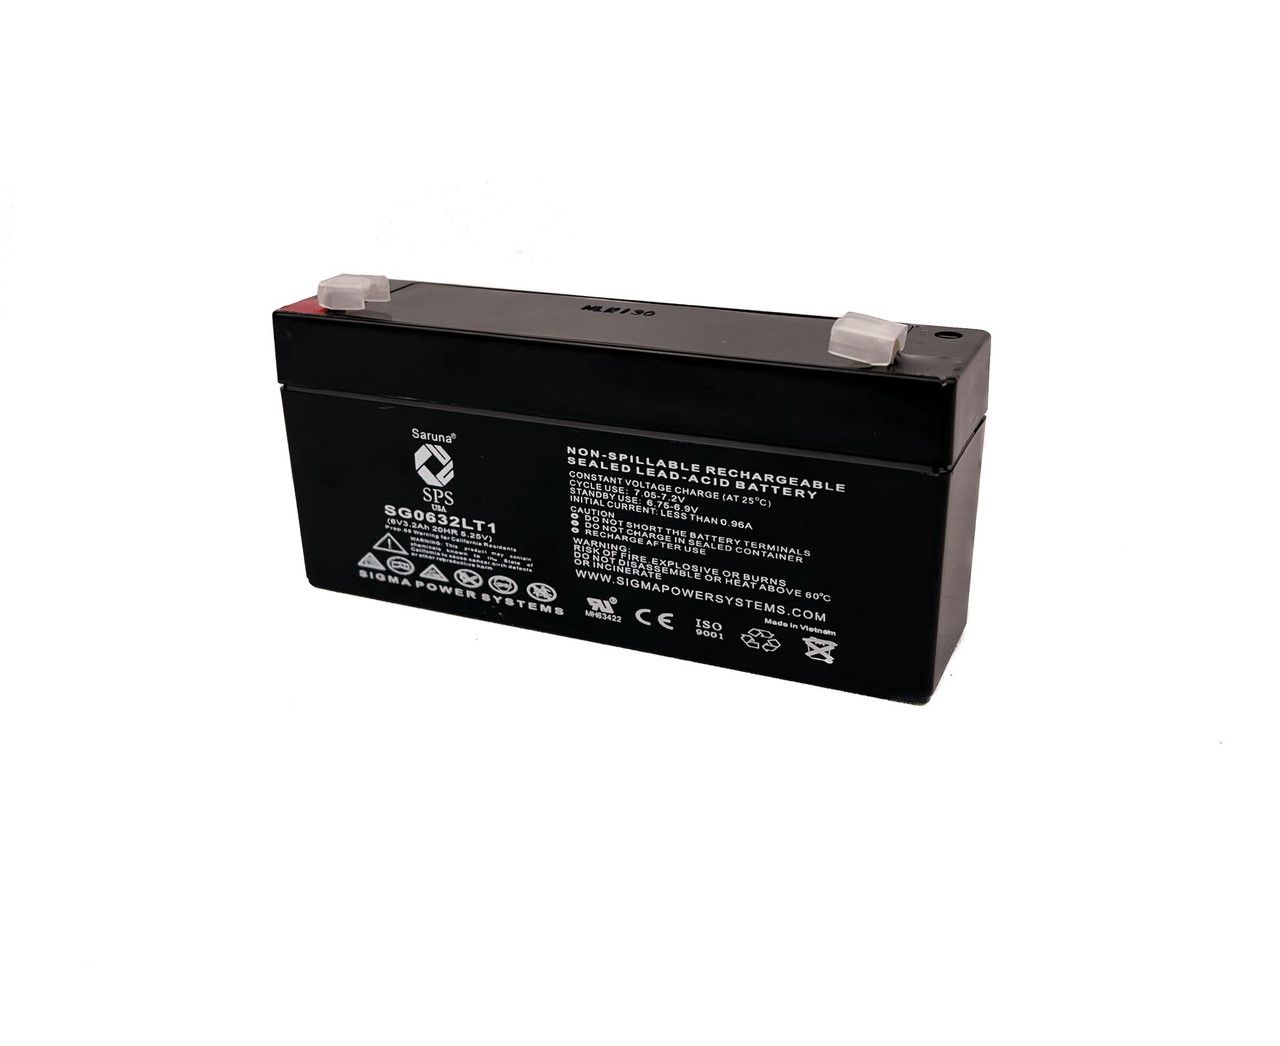 Raion Power 6V 3.2Ah Non-Spillable Replacement Rechargebale Battery for Health o meter 482 Scale